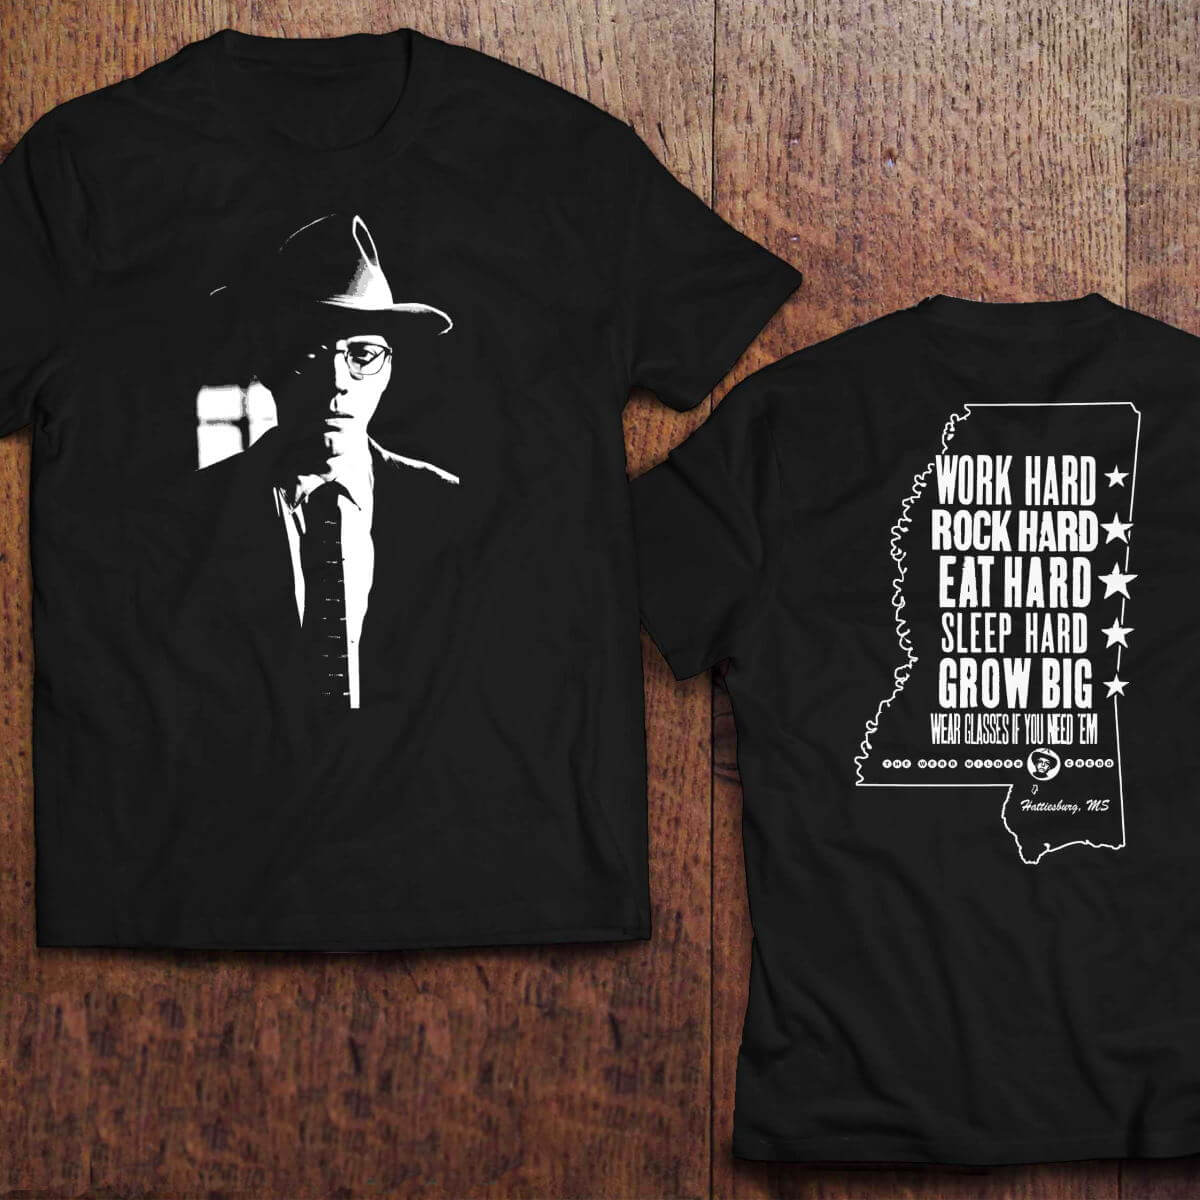 New WW Private Eye T-Shirt